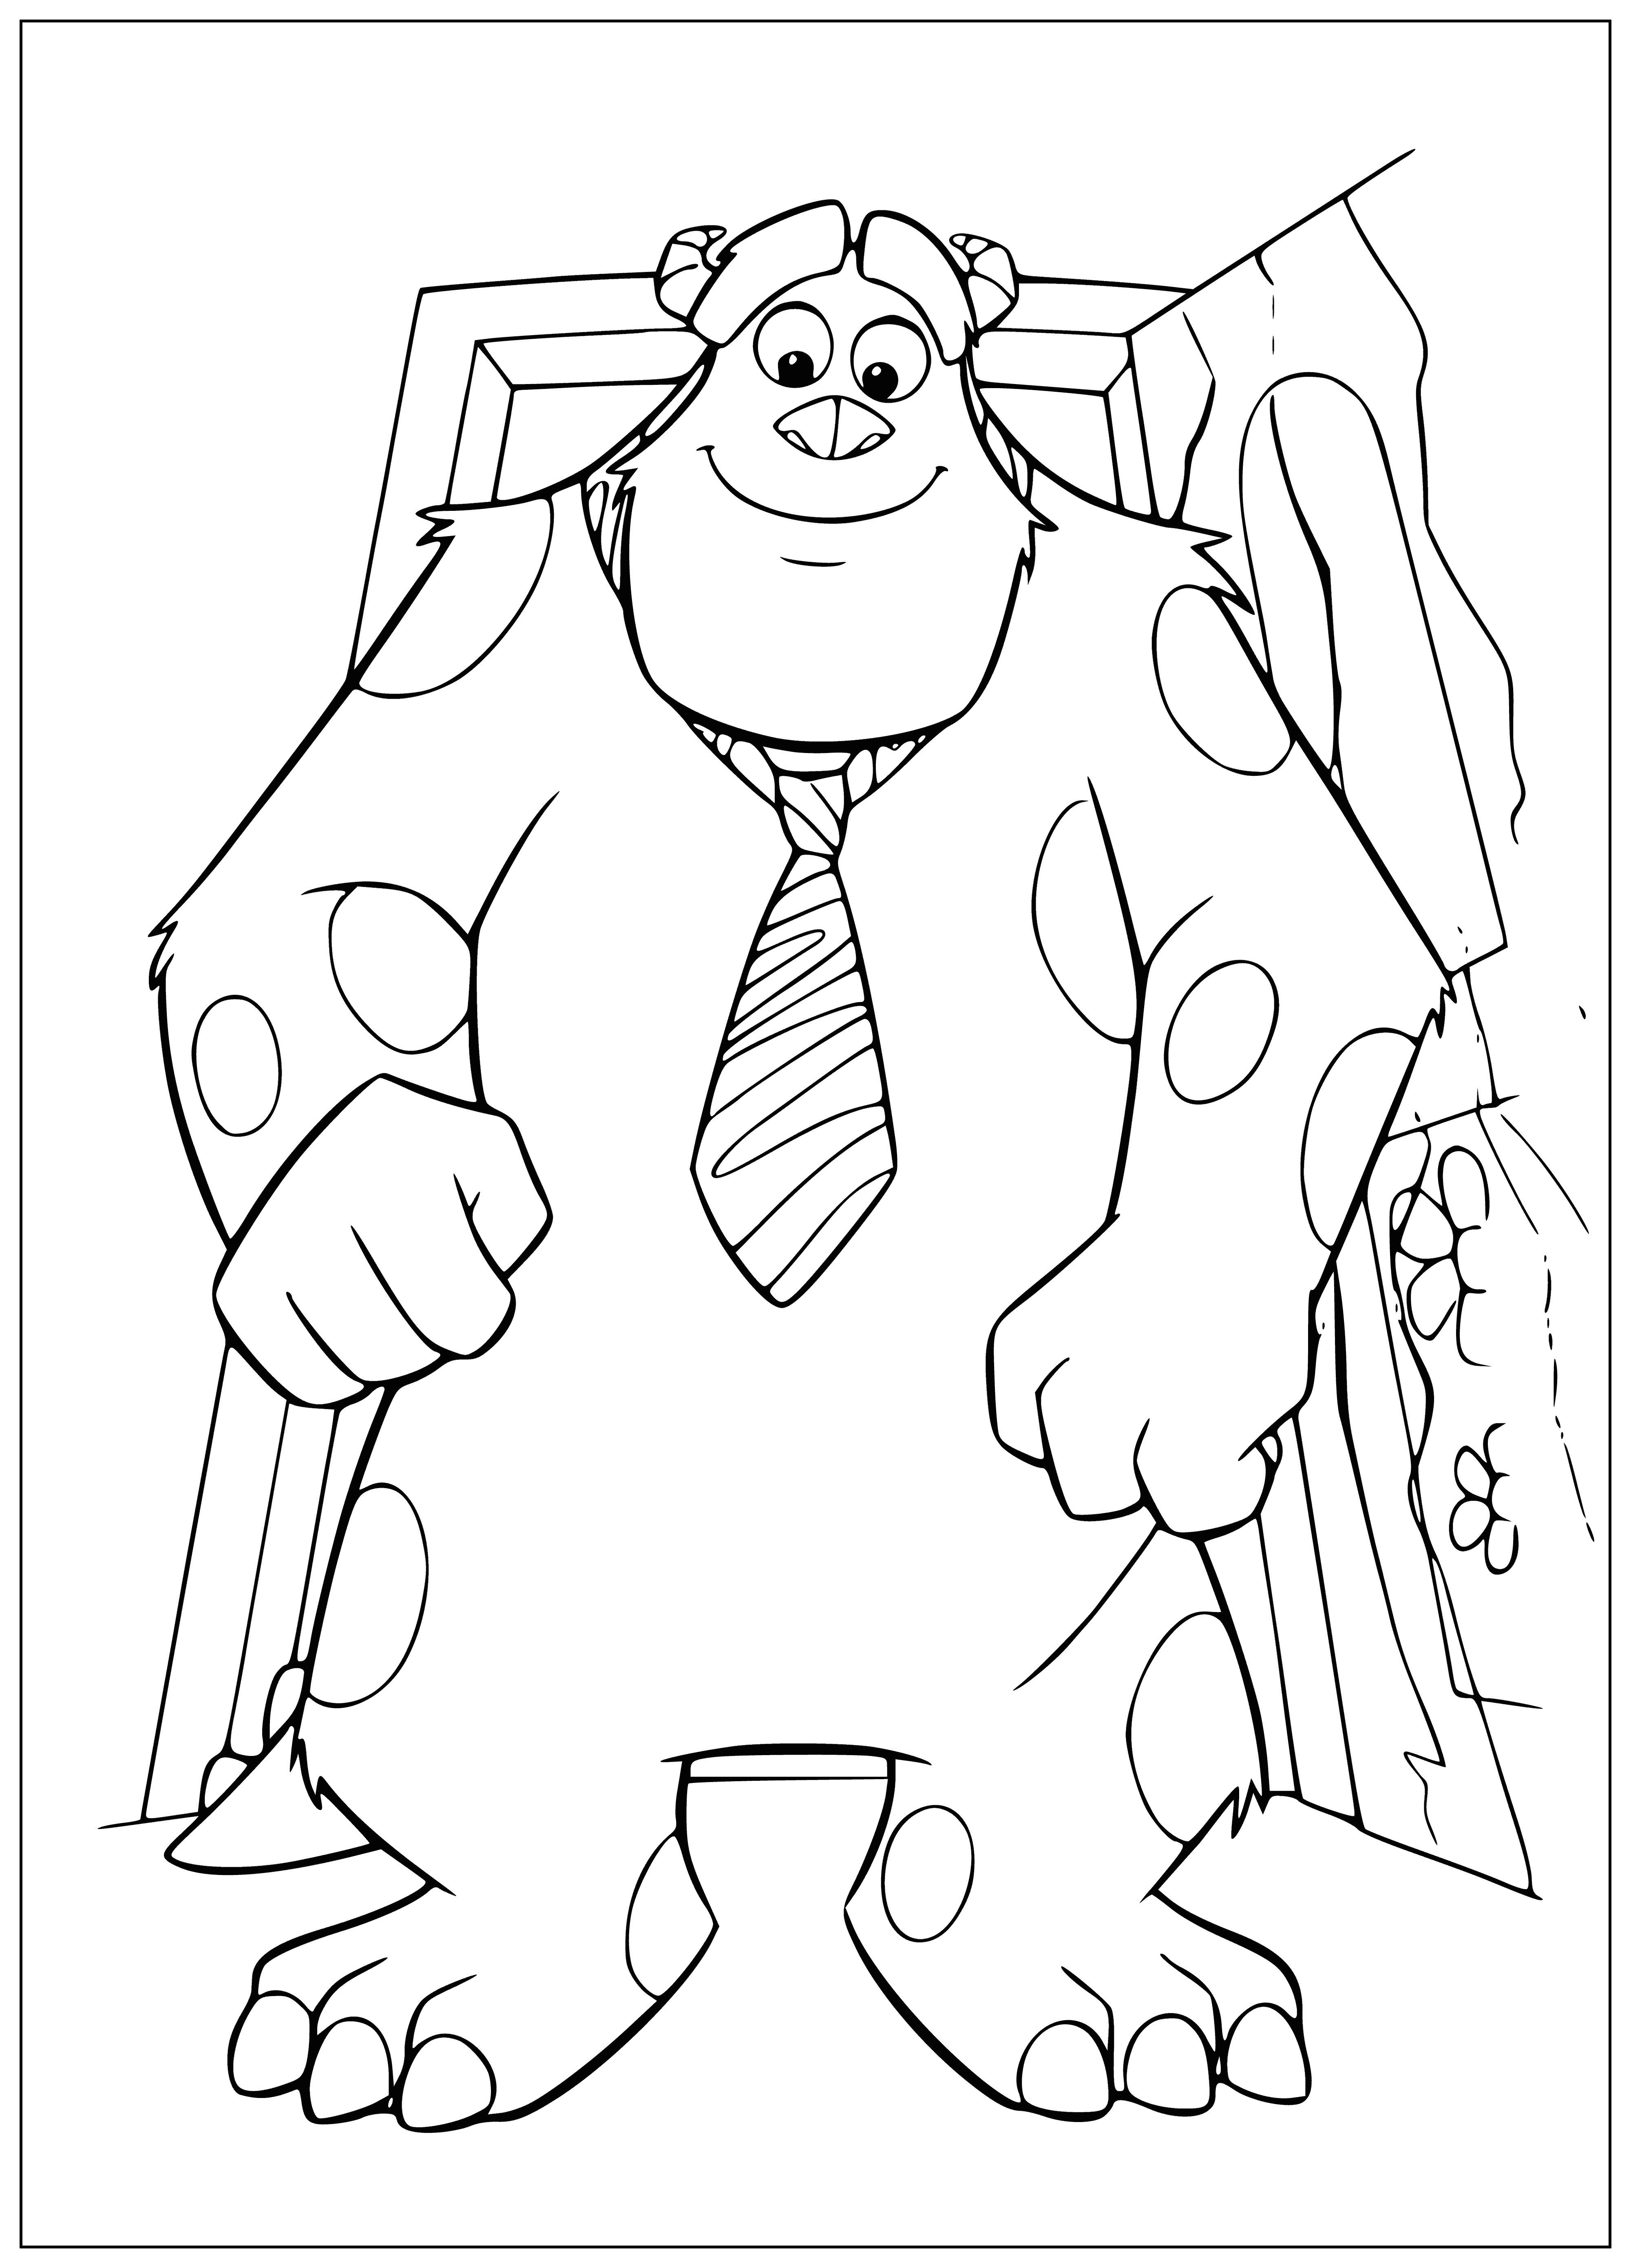 coloring page: Sally is a little girl with blue fur, blue eyes & tie, and a white shirt, skirt, & shoes.